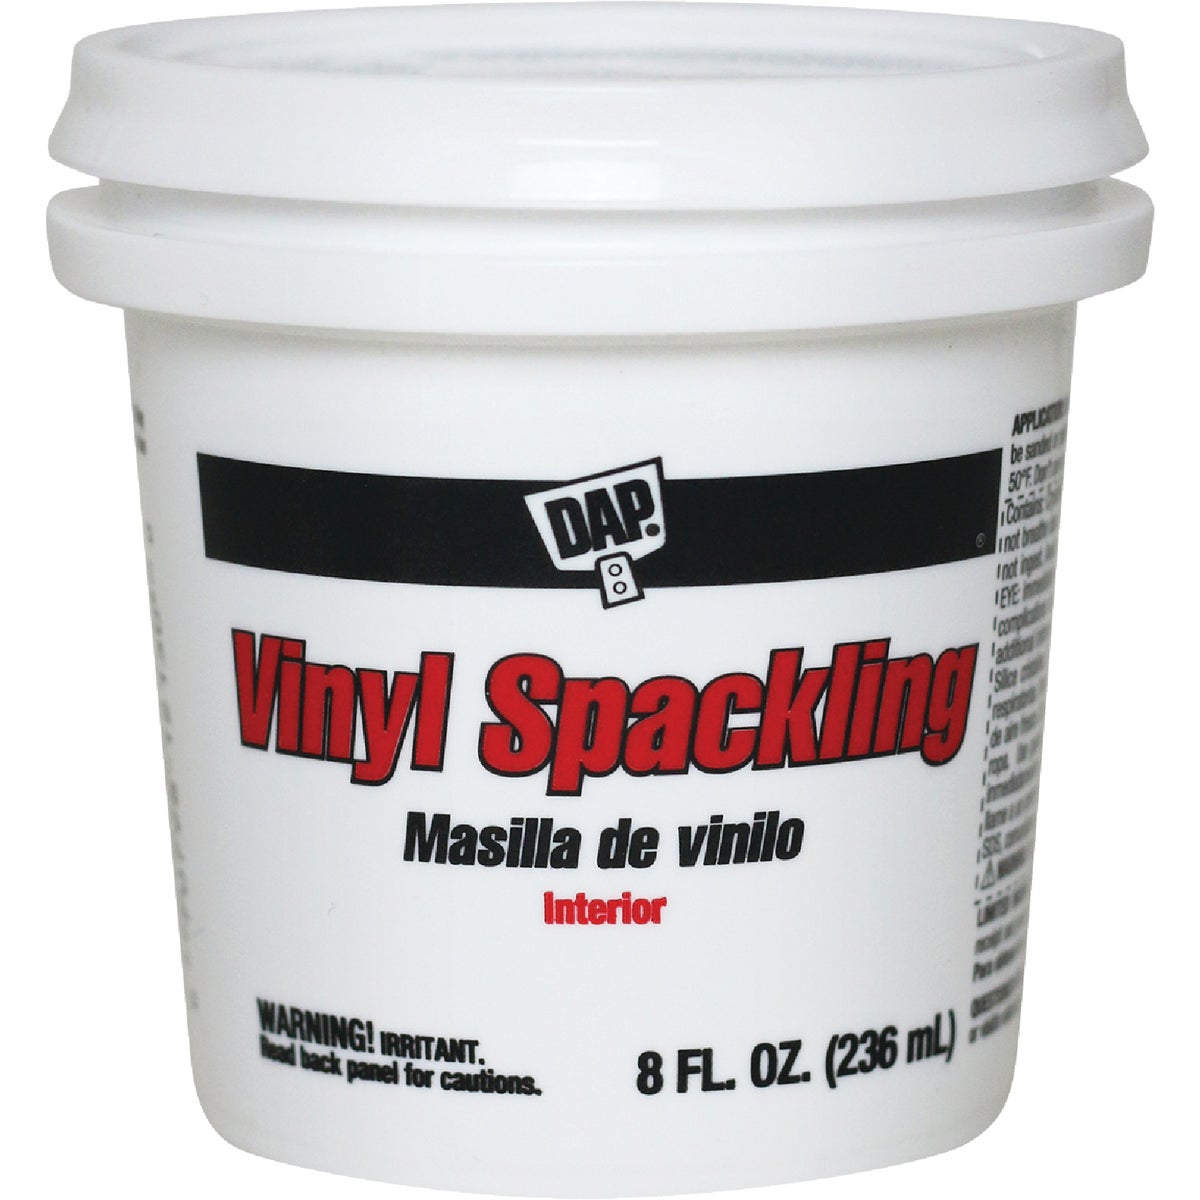 Item 773791, Ready mixed vinyl paste spackling compound. Creamy smooth.